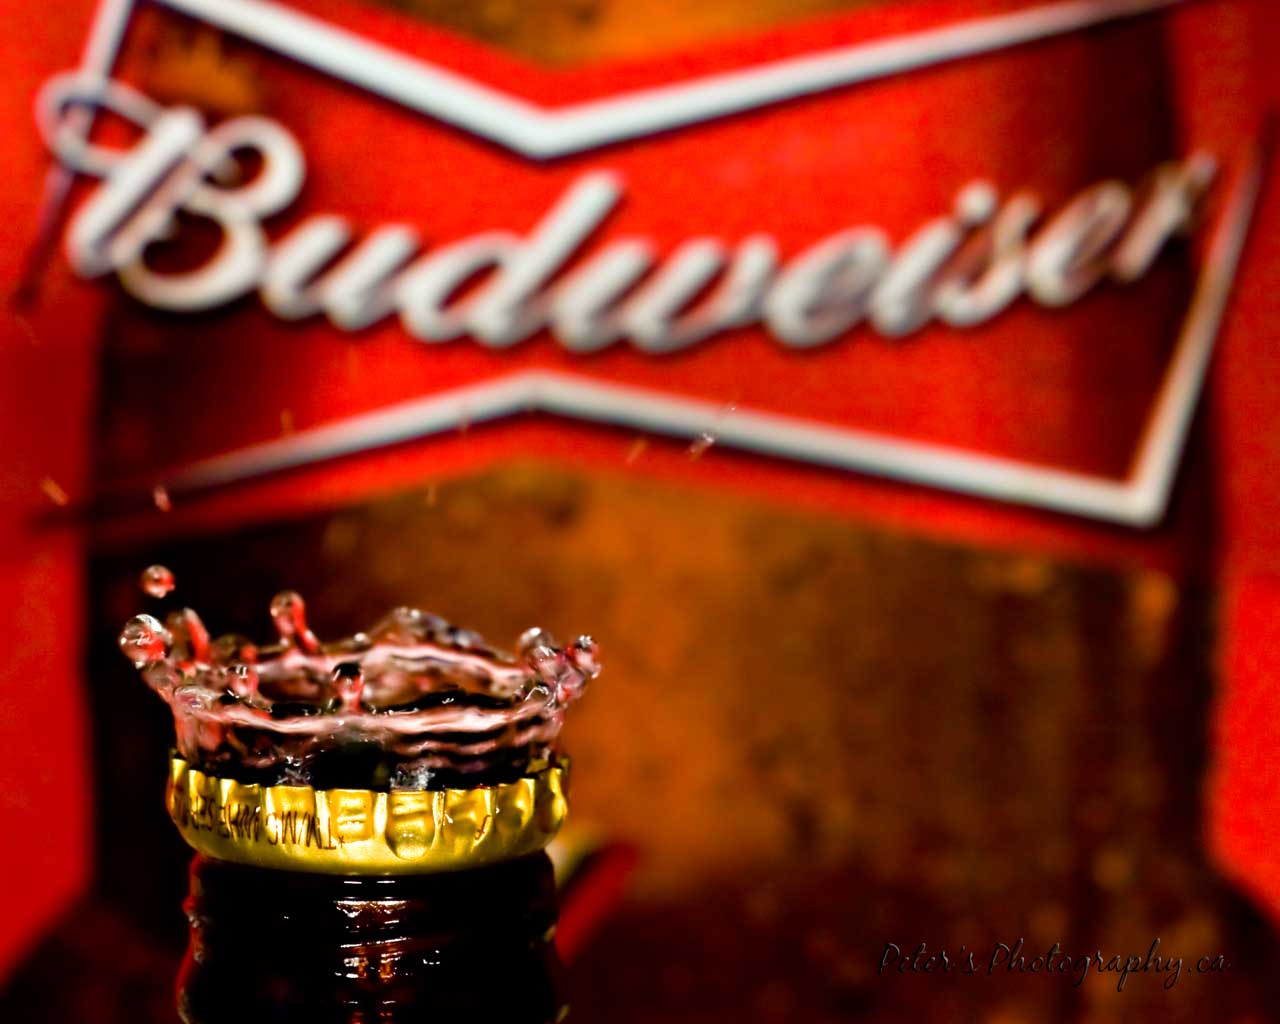 New Wallpaper Budweiser Is Truly The King